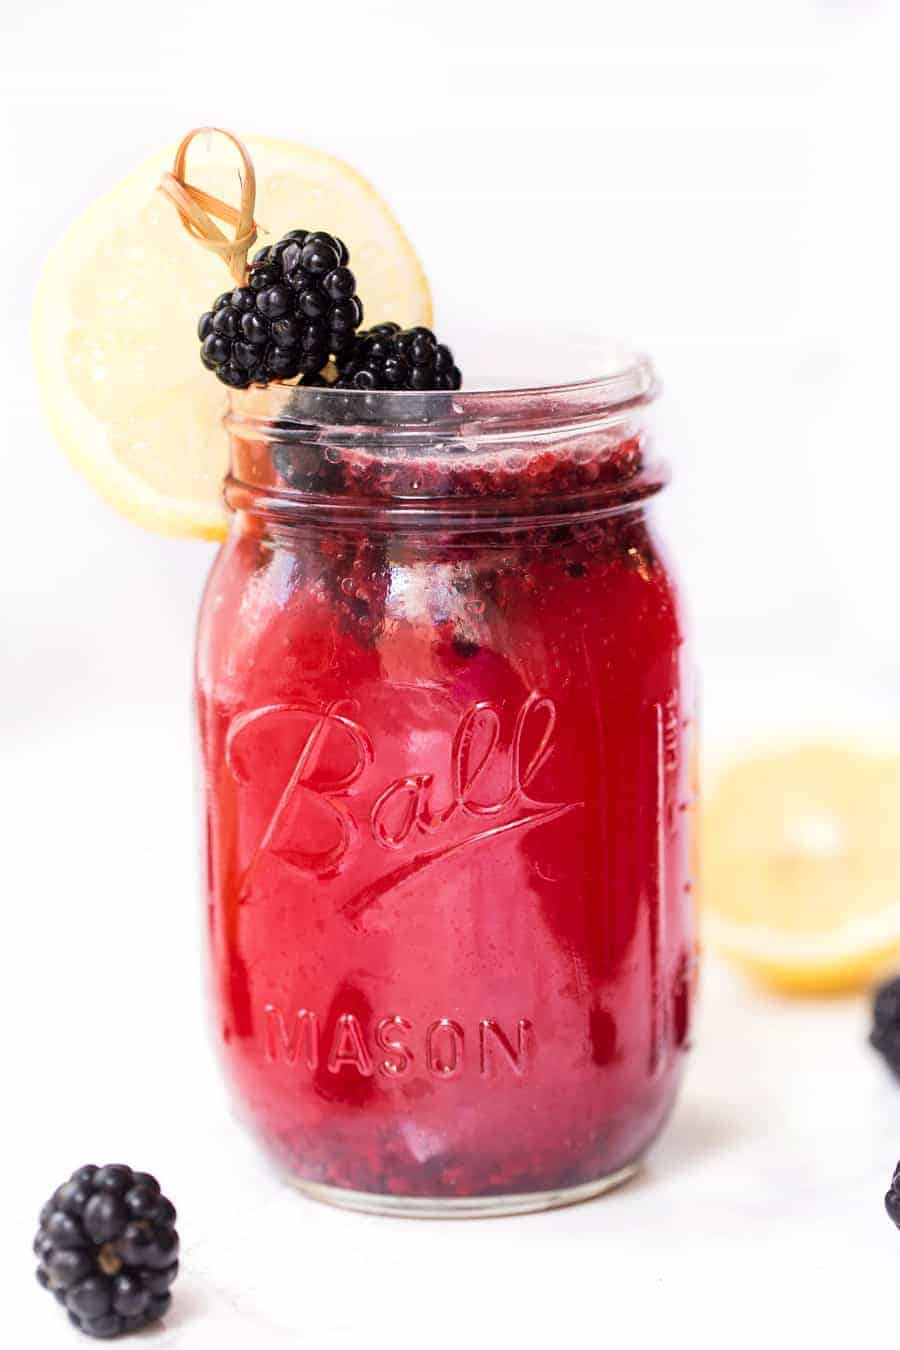 SPARKLING BLACKBERRY LEMONADE -- made with just 4 ingredients, naturally sweetened and so delicious!